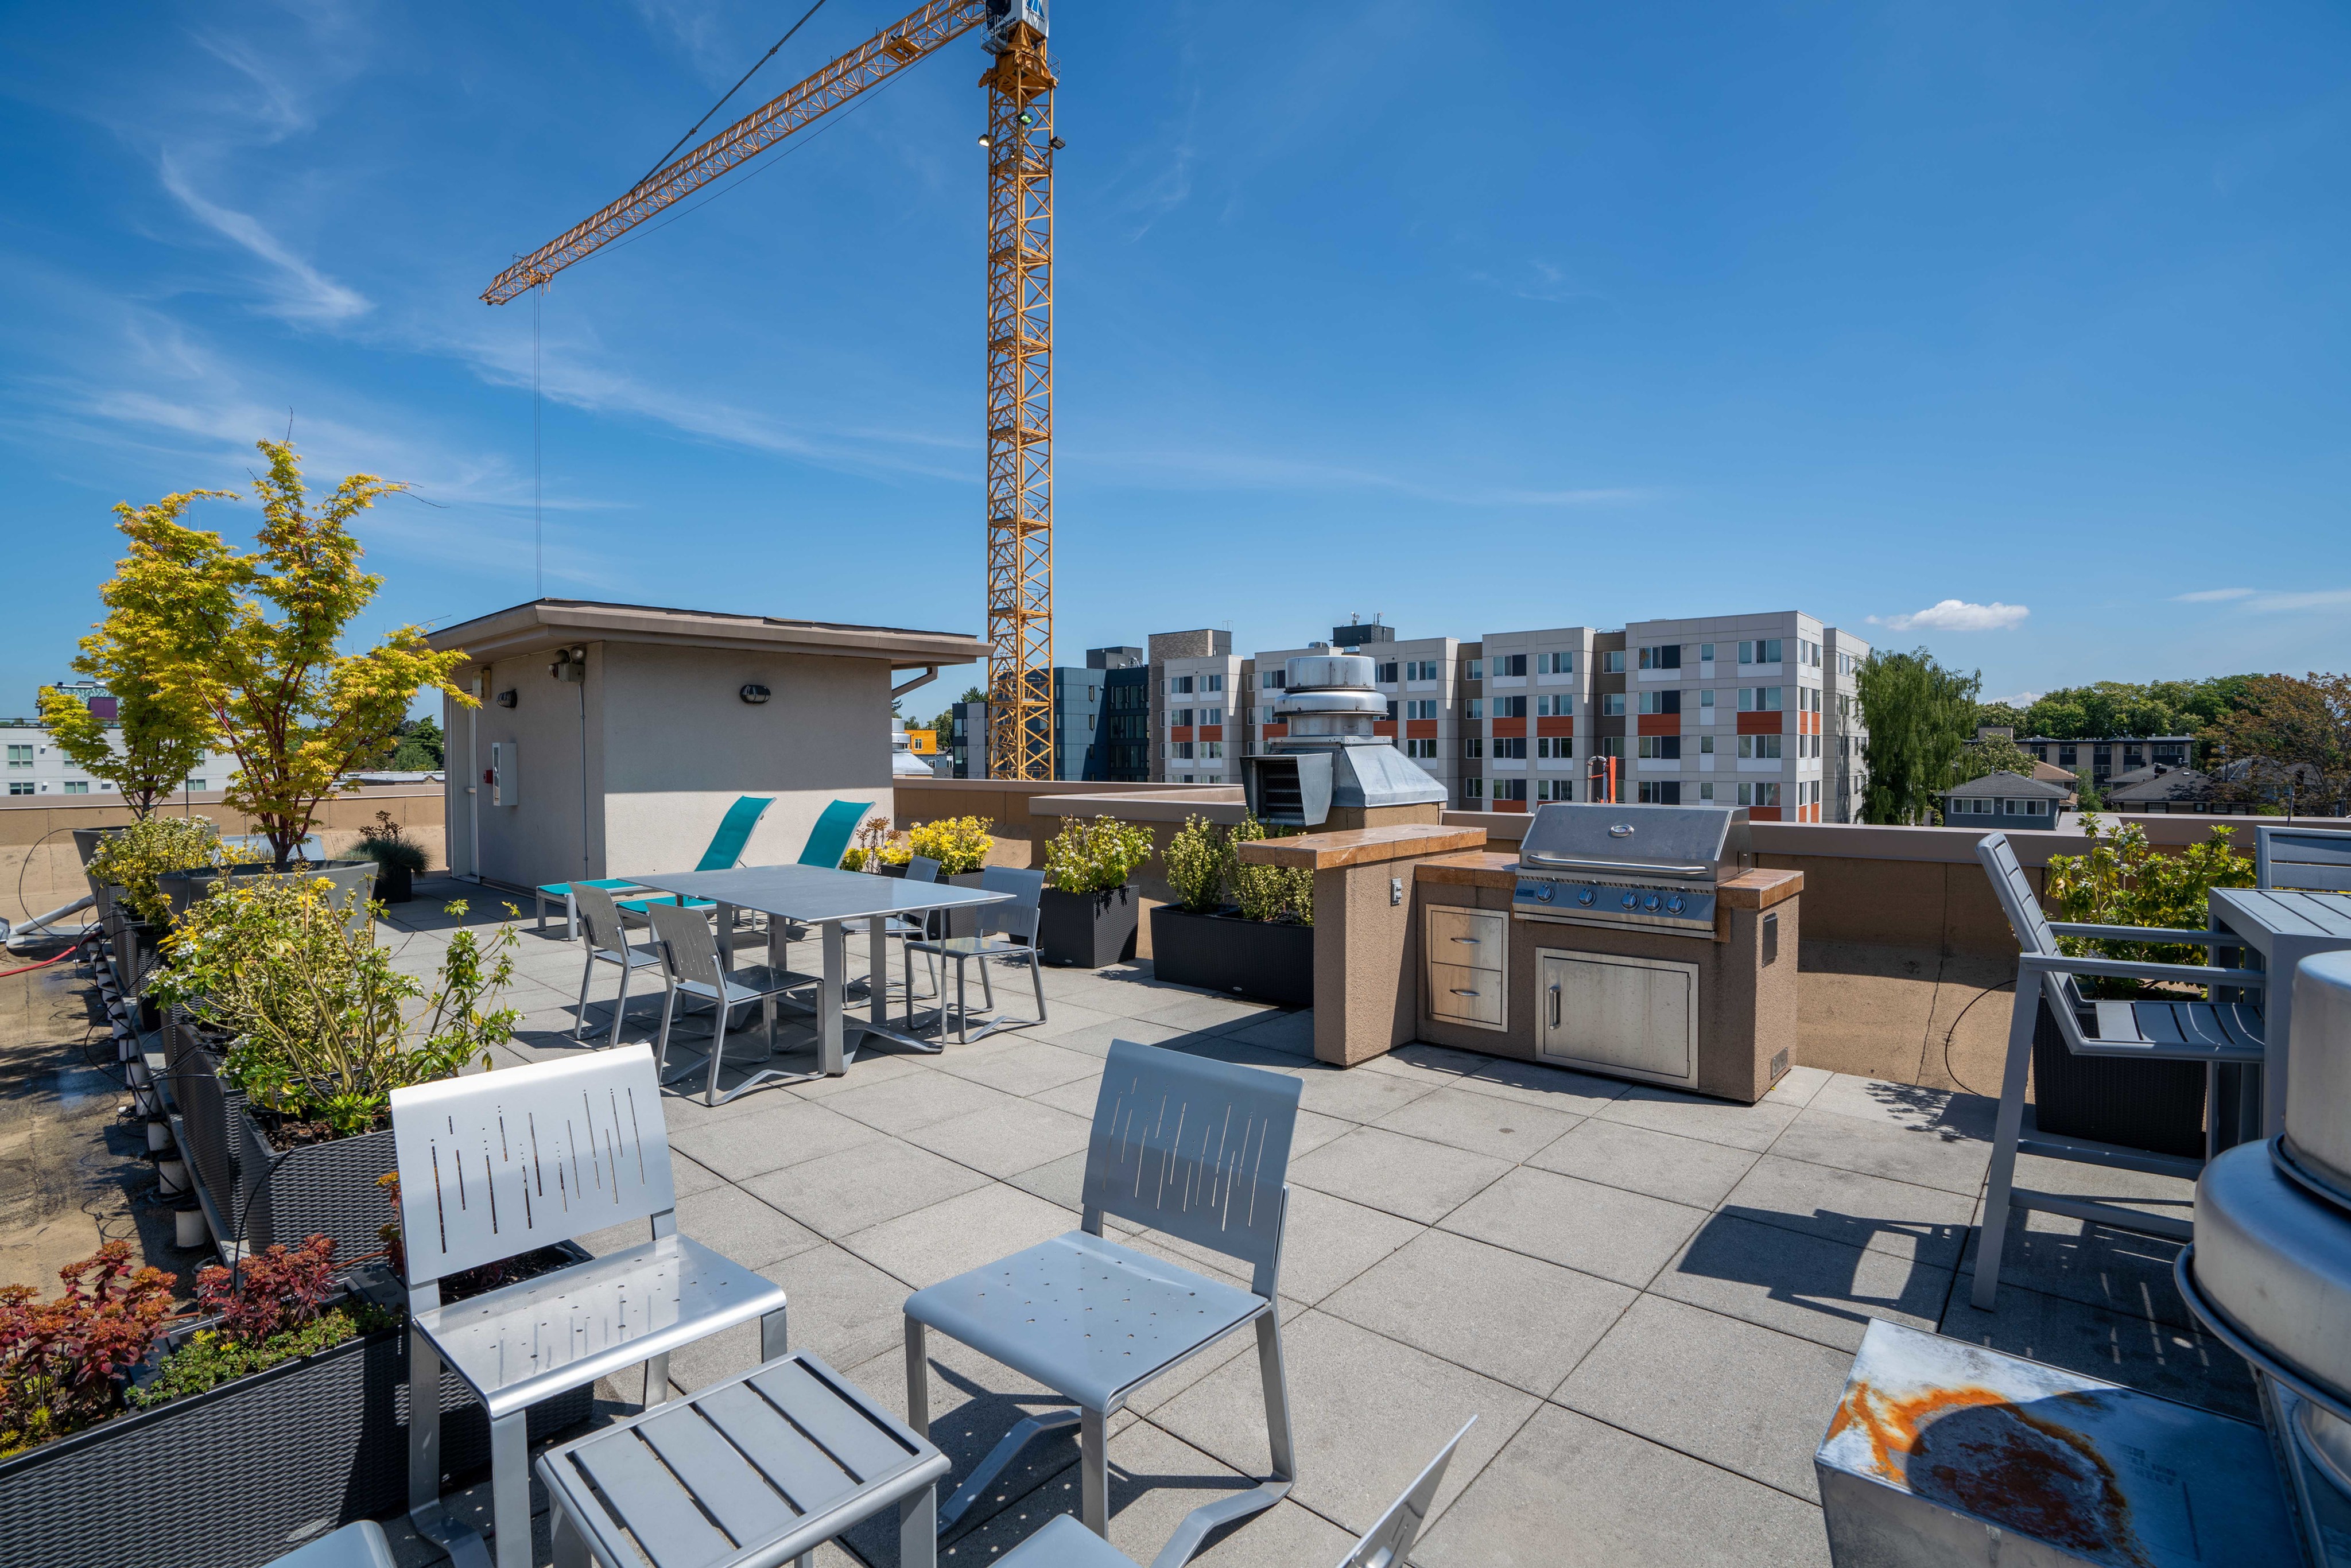 Lothlorien Apartments Lifestyle - Rooftop Terrace With BBQ Grills